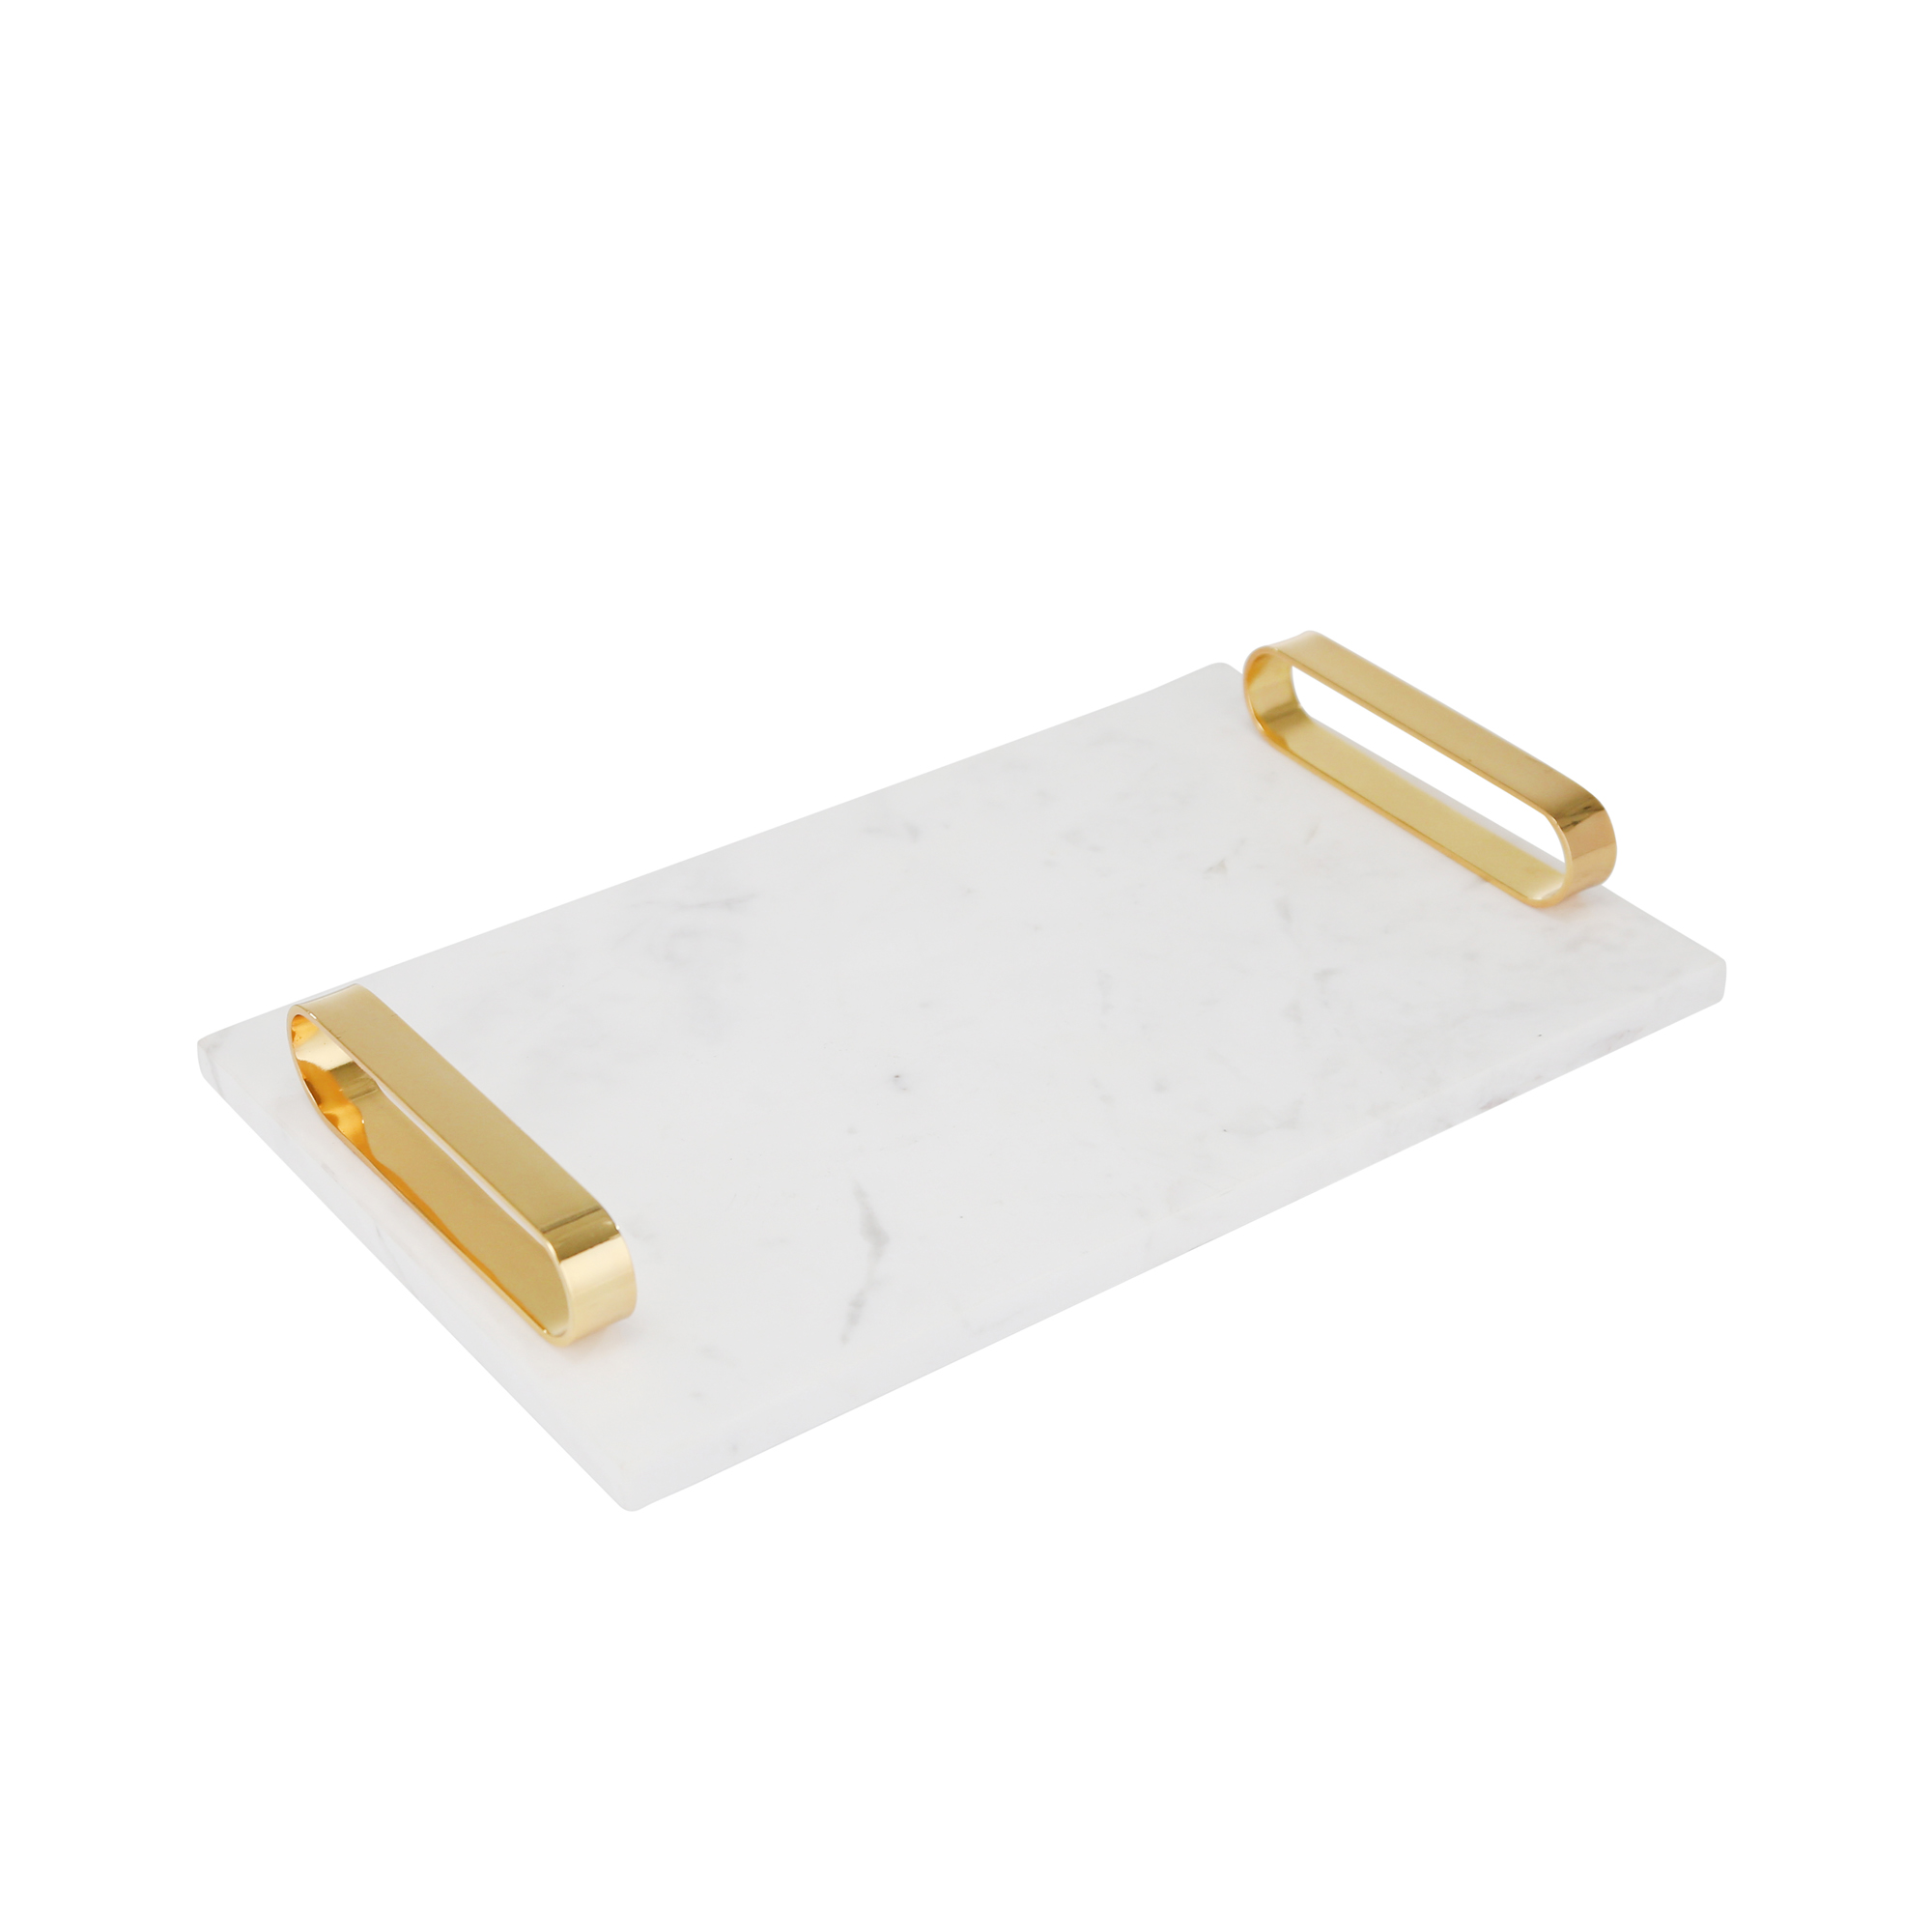 Sagebrook Home White Marble Tray With Gold Handles 13641 eBay